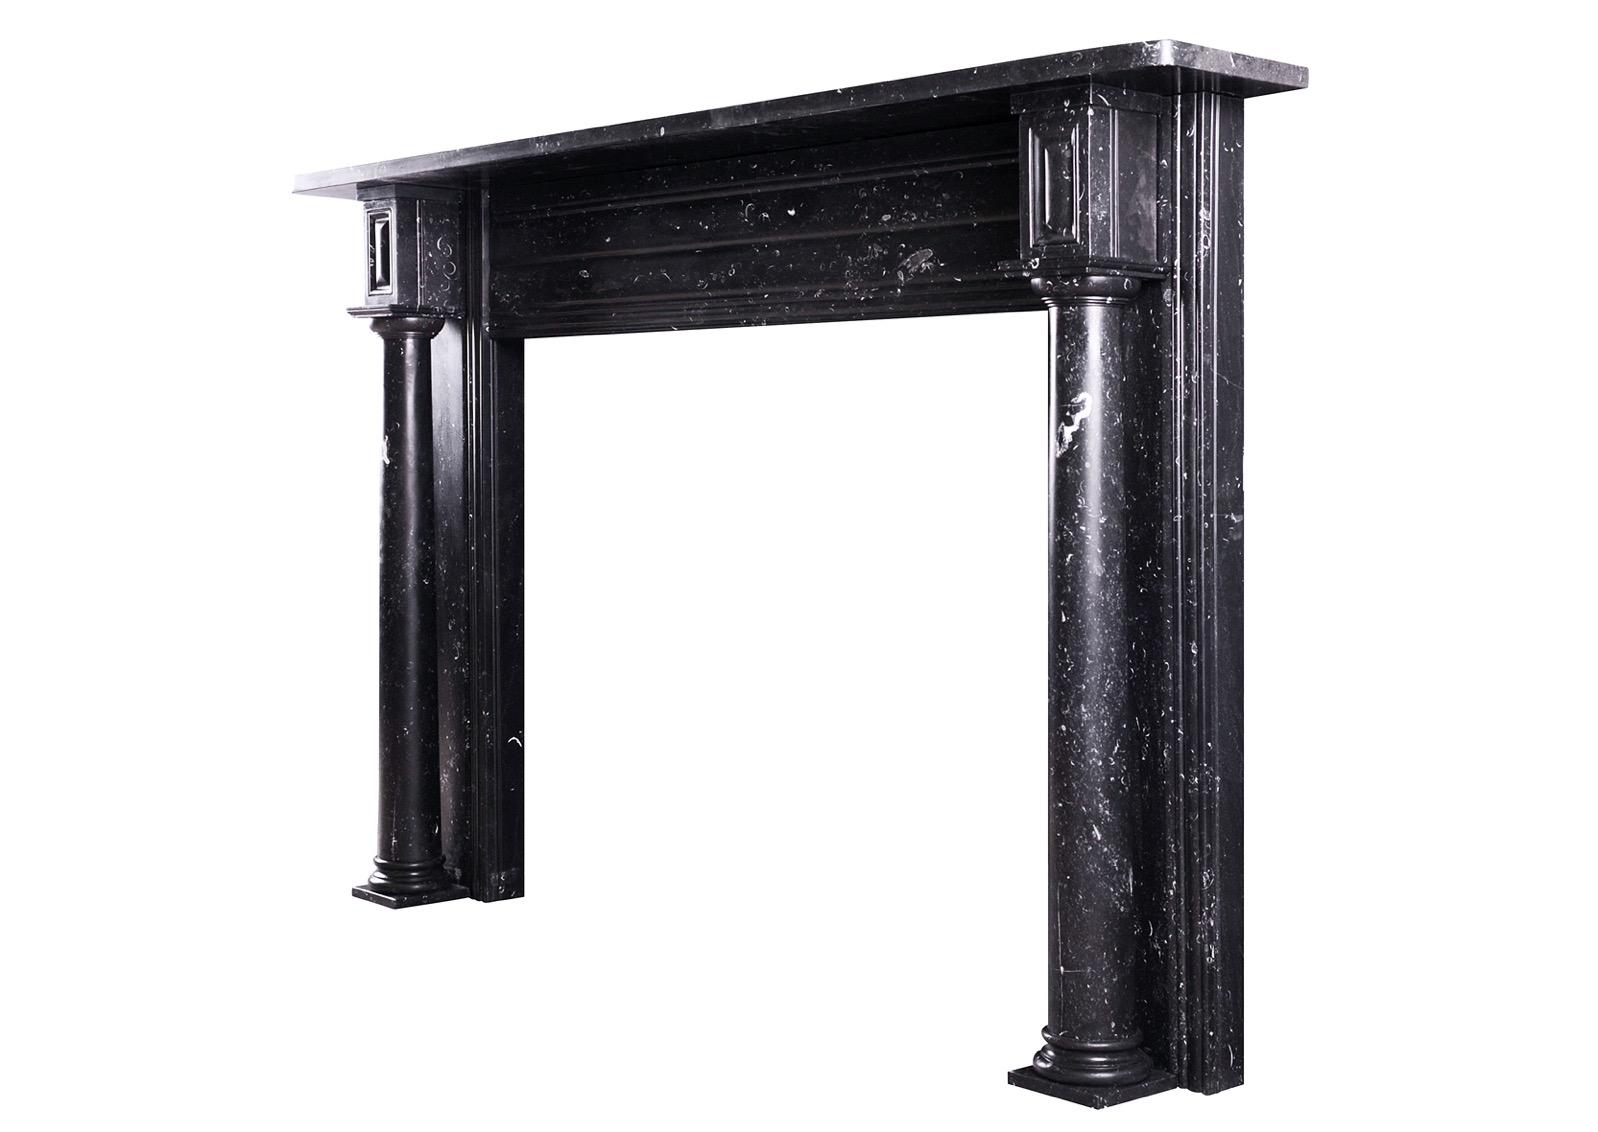 English Black Kilkenny Marble Fireplace For Sale